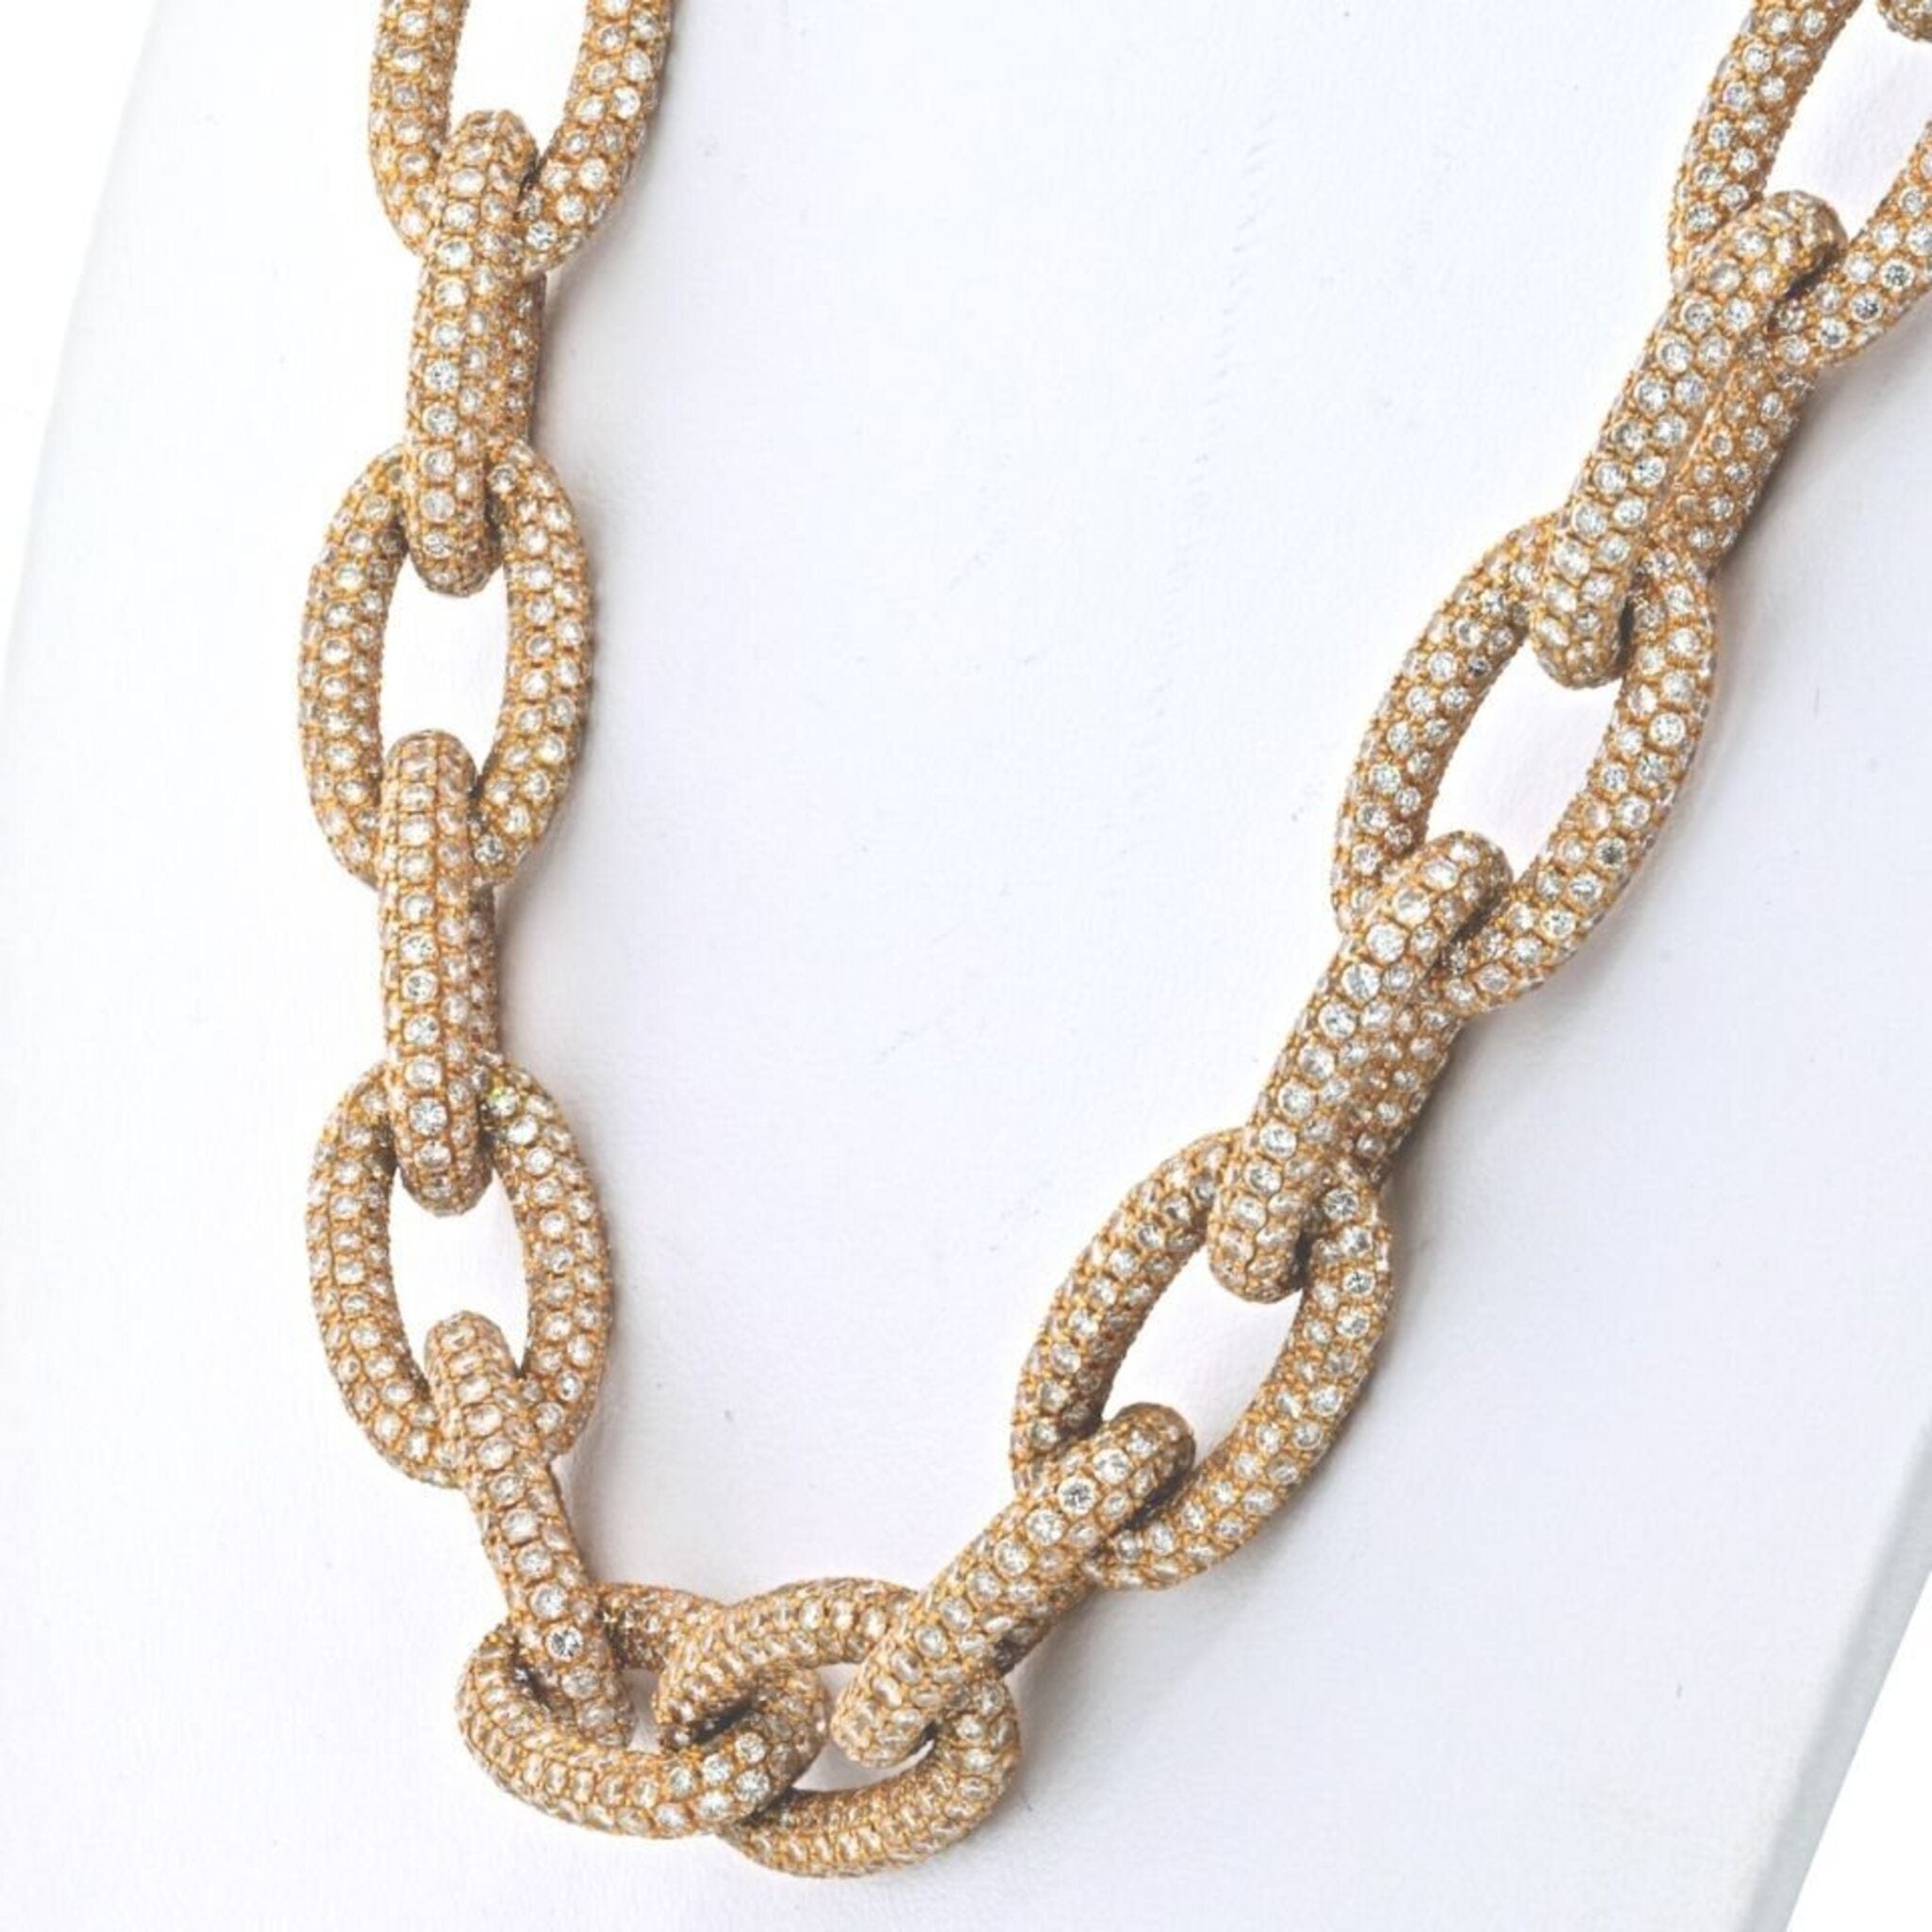 Beautifully Anchored: Large Gold Chain Necklace w/ Rhinestone Charms  Handmade By Eccentric Bijouterie – Eccentric Bijouterie LLC